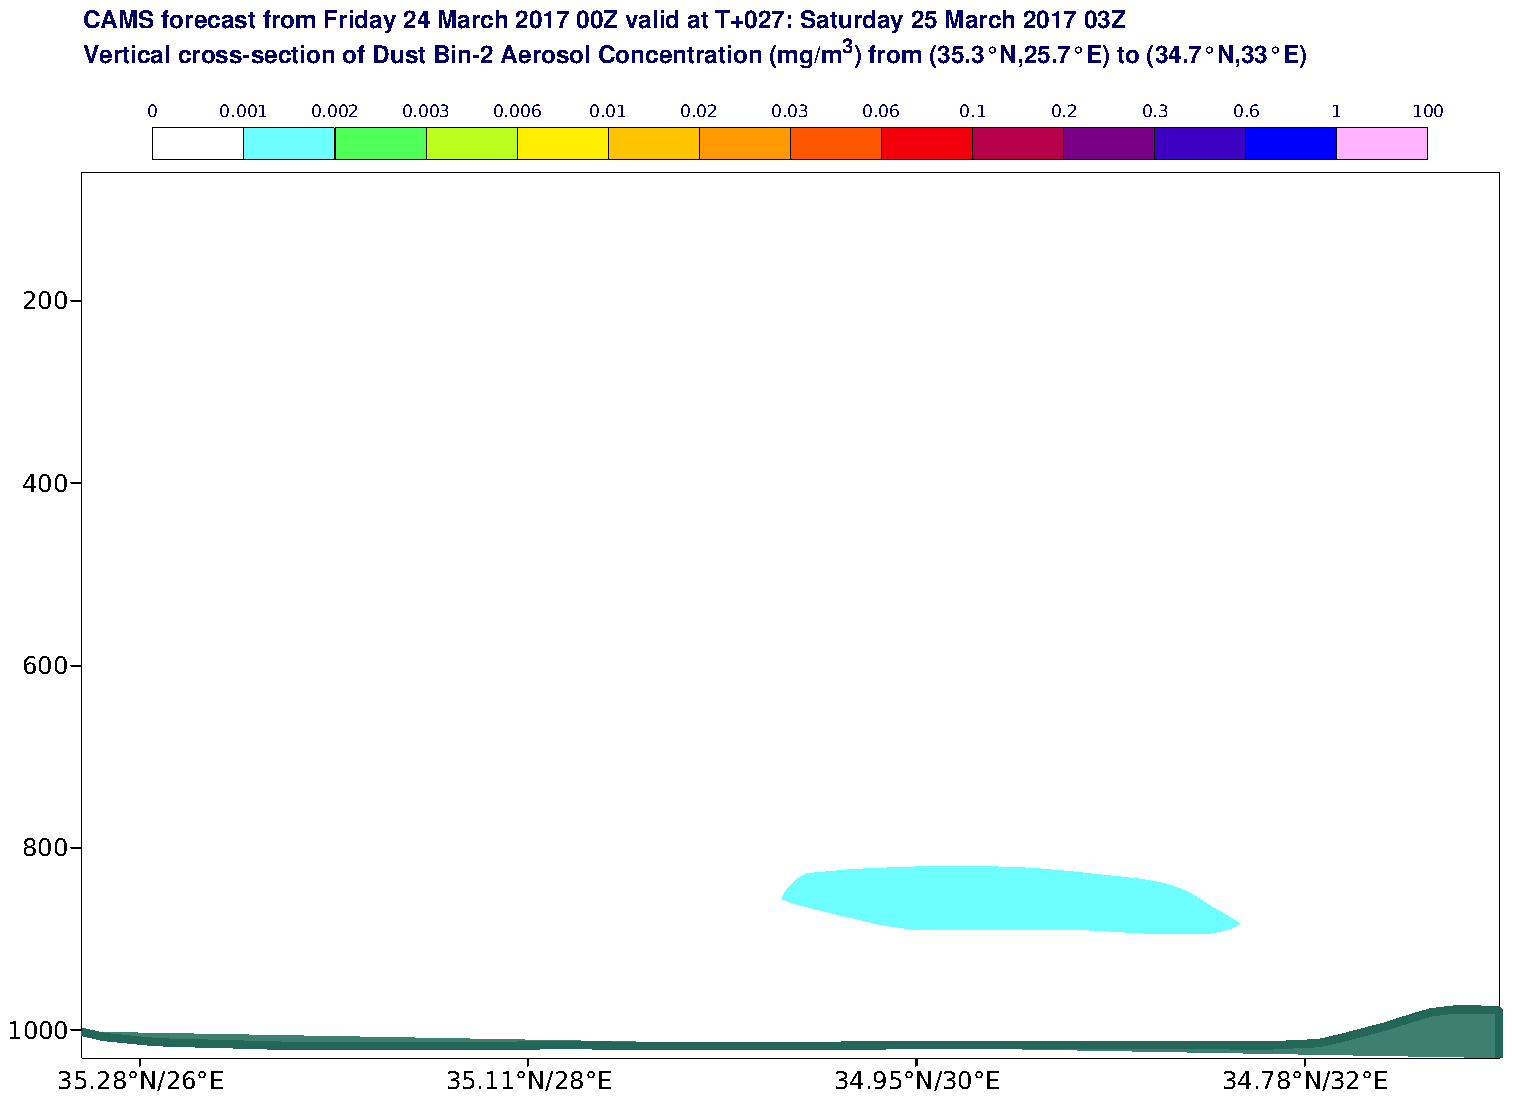 Vertical cross-section of Dust Bin-2 Aerosol Concentration (mg/m3) valid at T27 - 2017-03-25 03:00